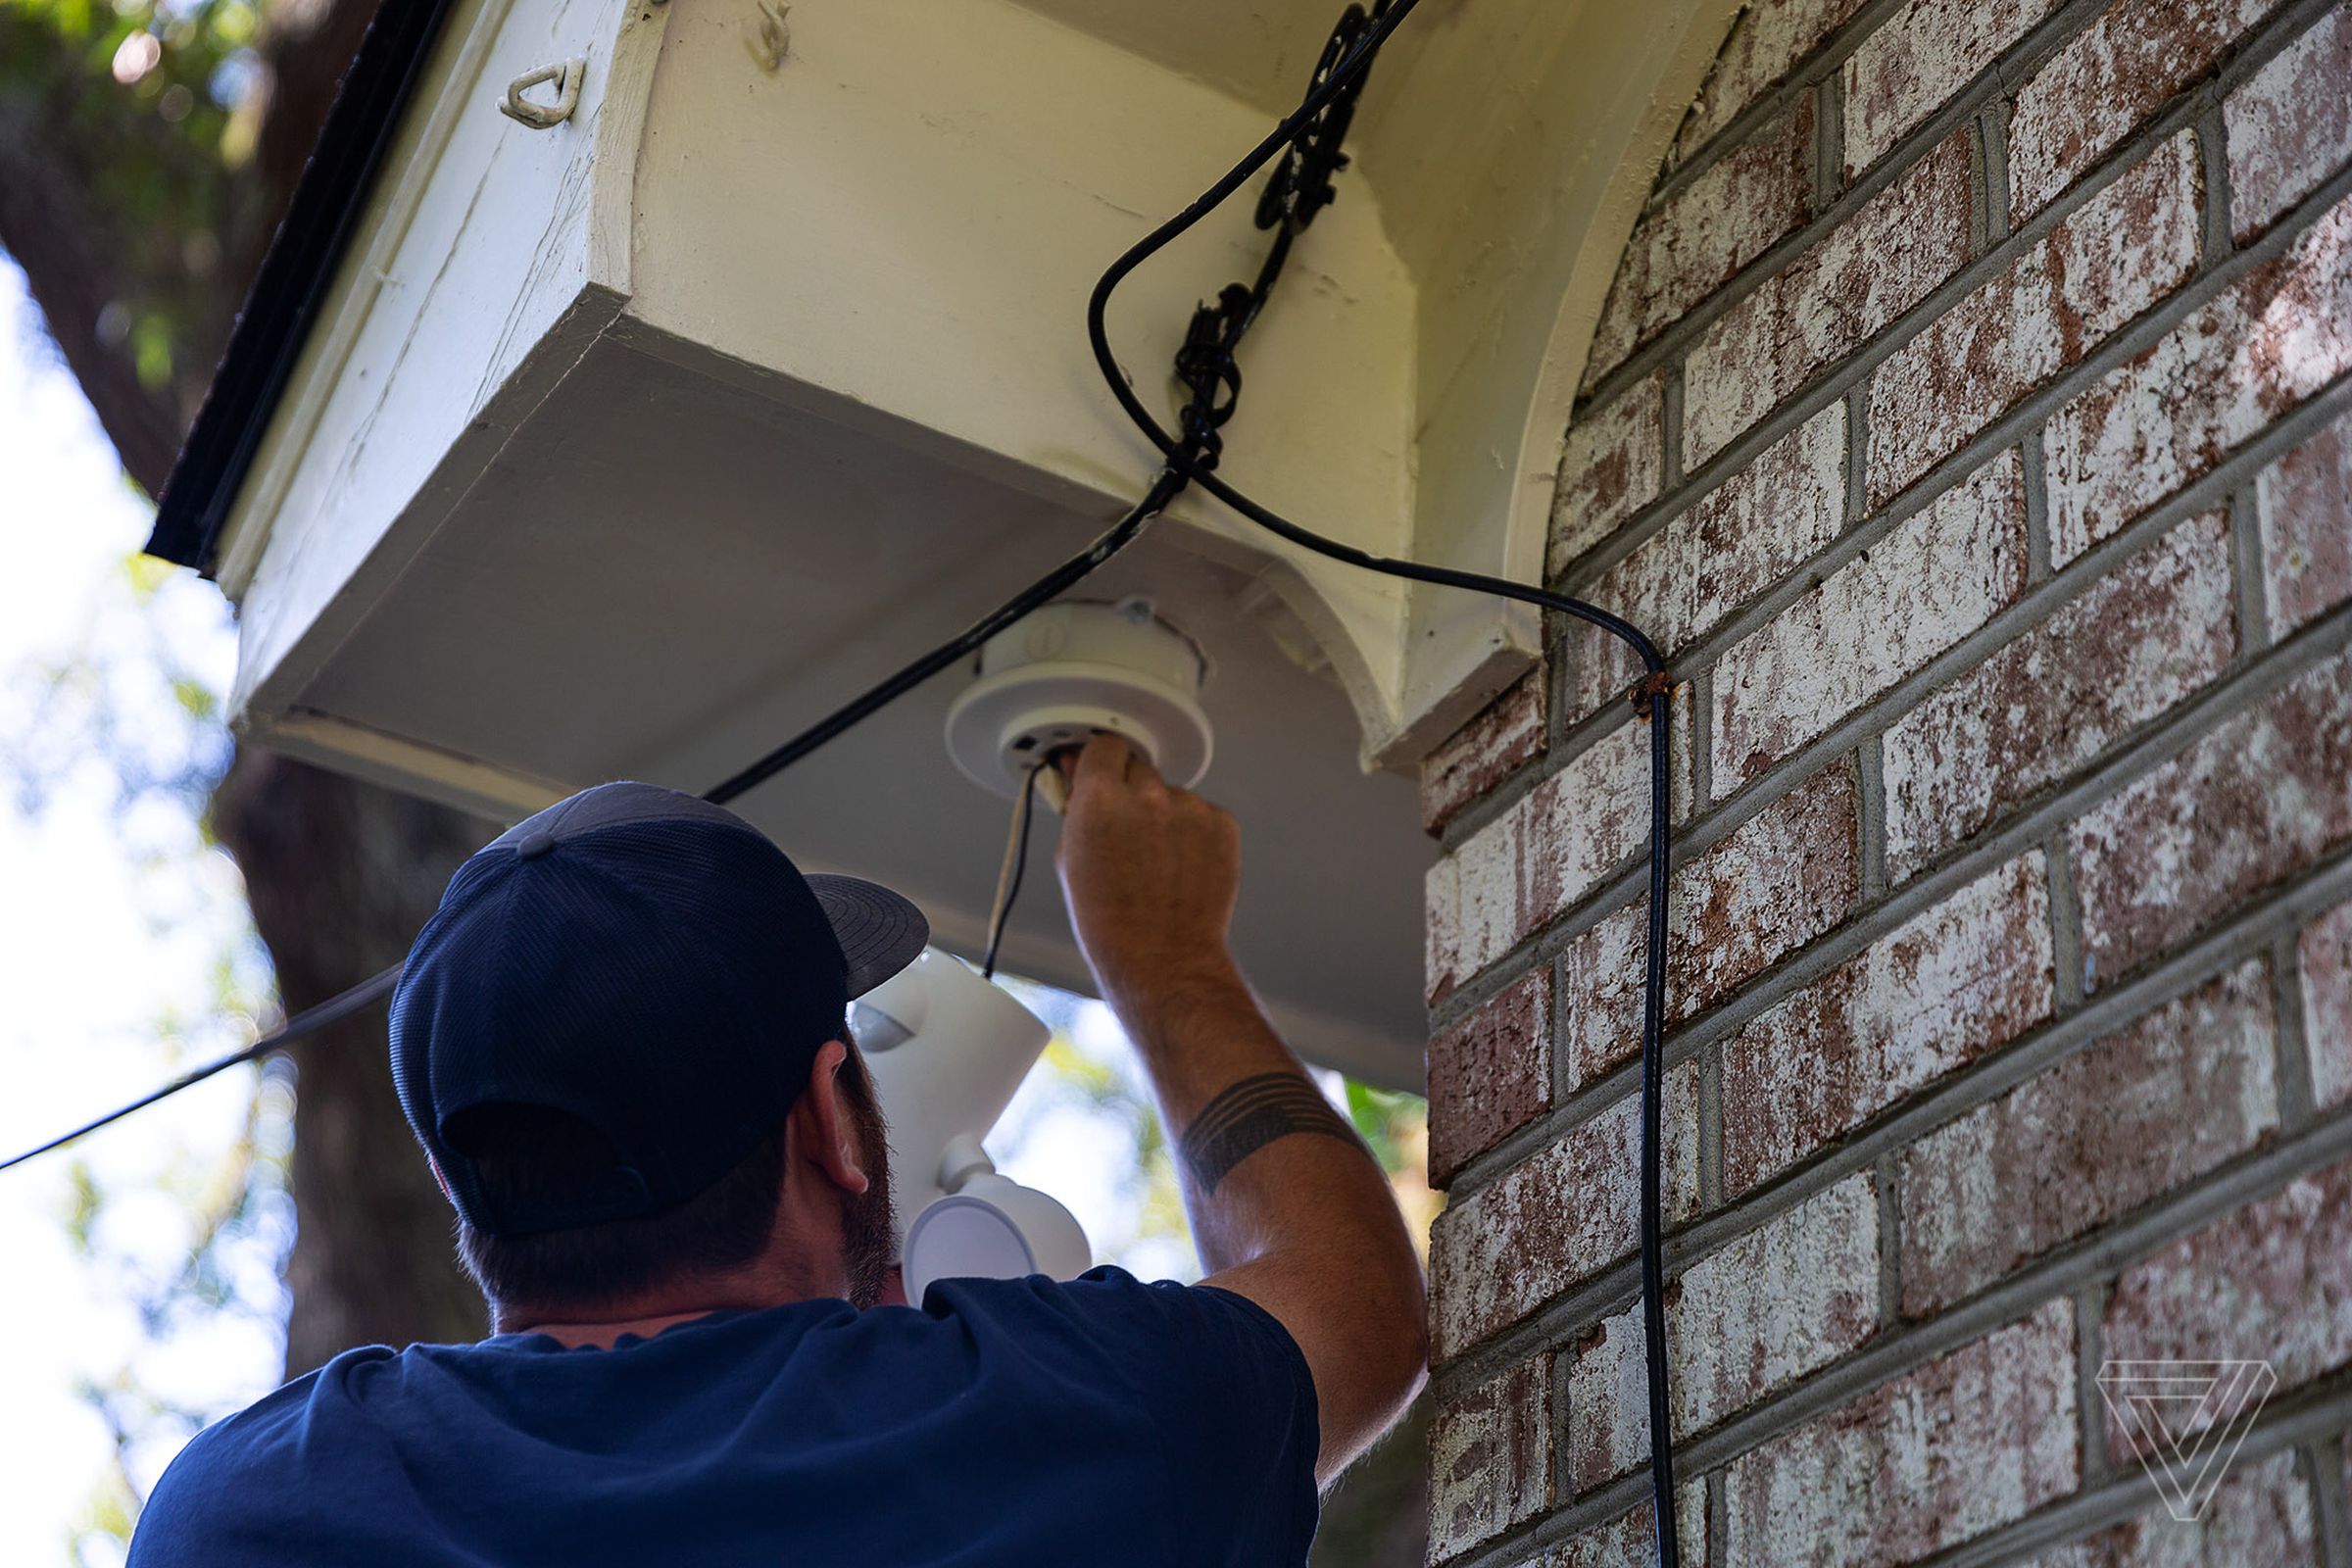 Installing a floodlight camera involves wiring and a ladder. While it can be a DIY project, it’s likely best suited to a licensed electrician.